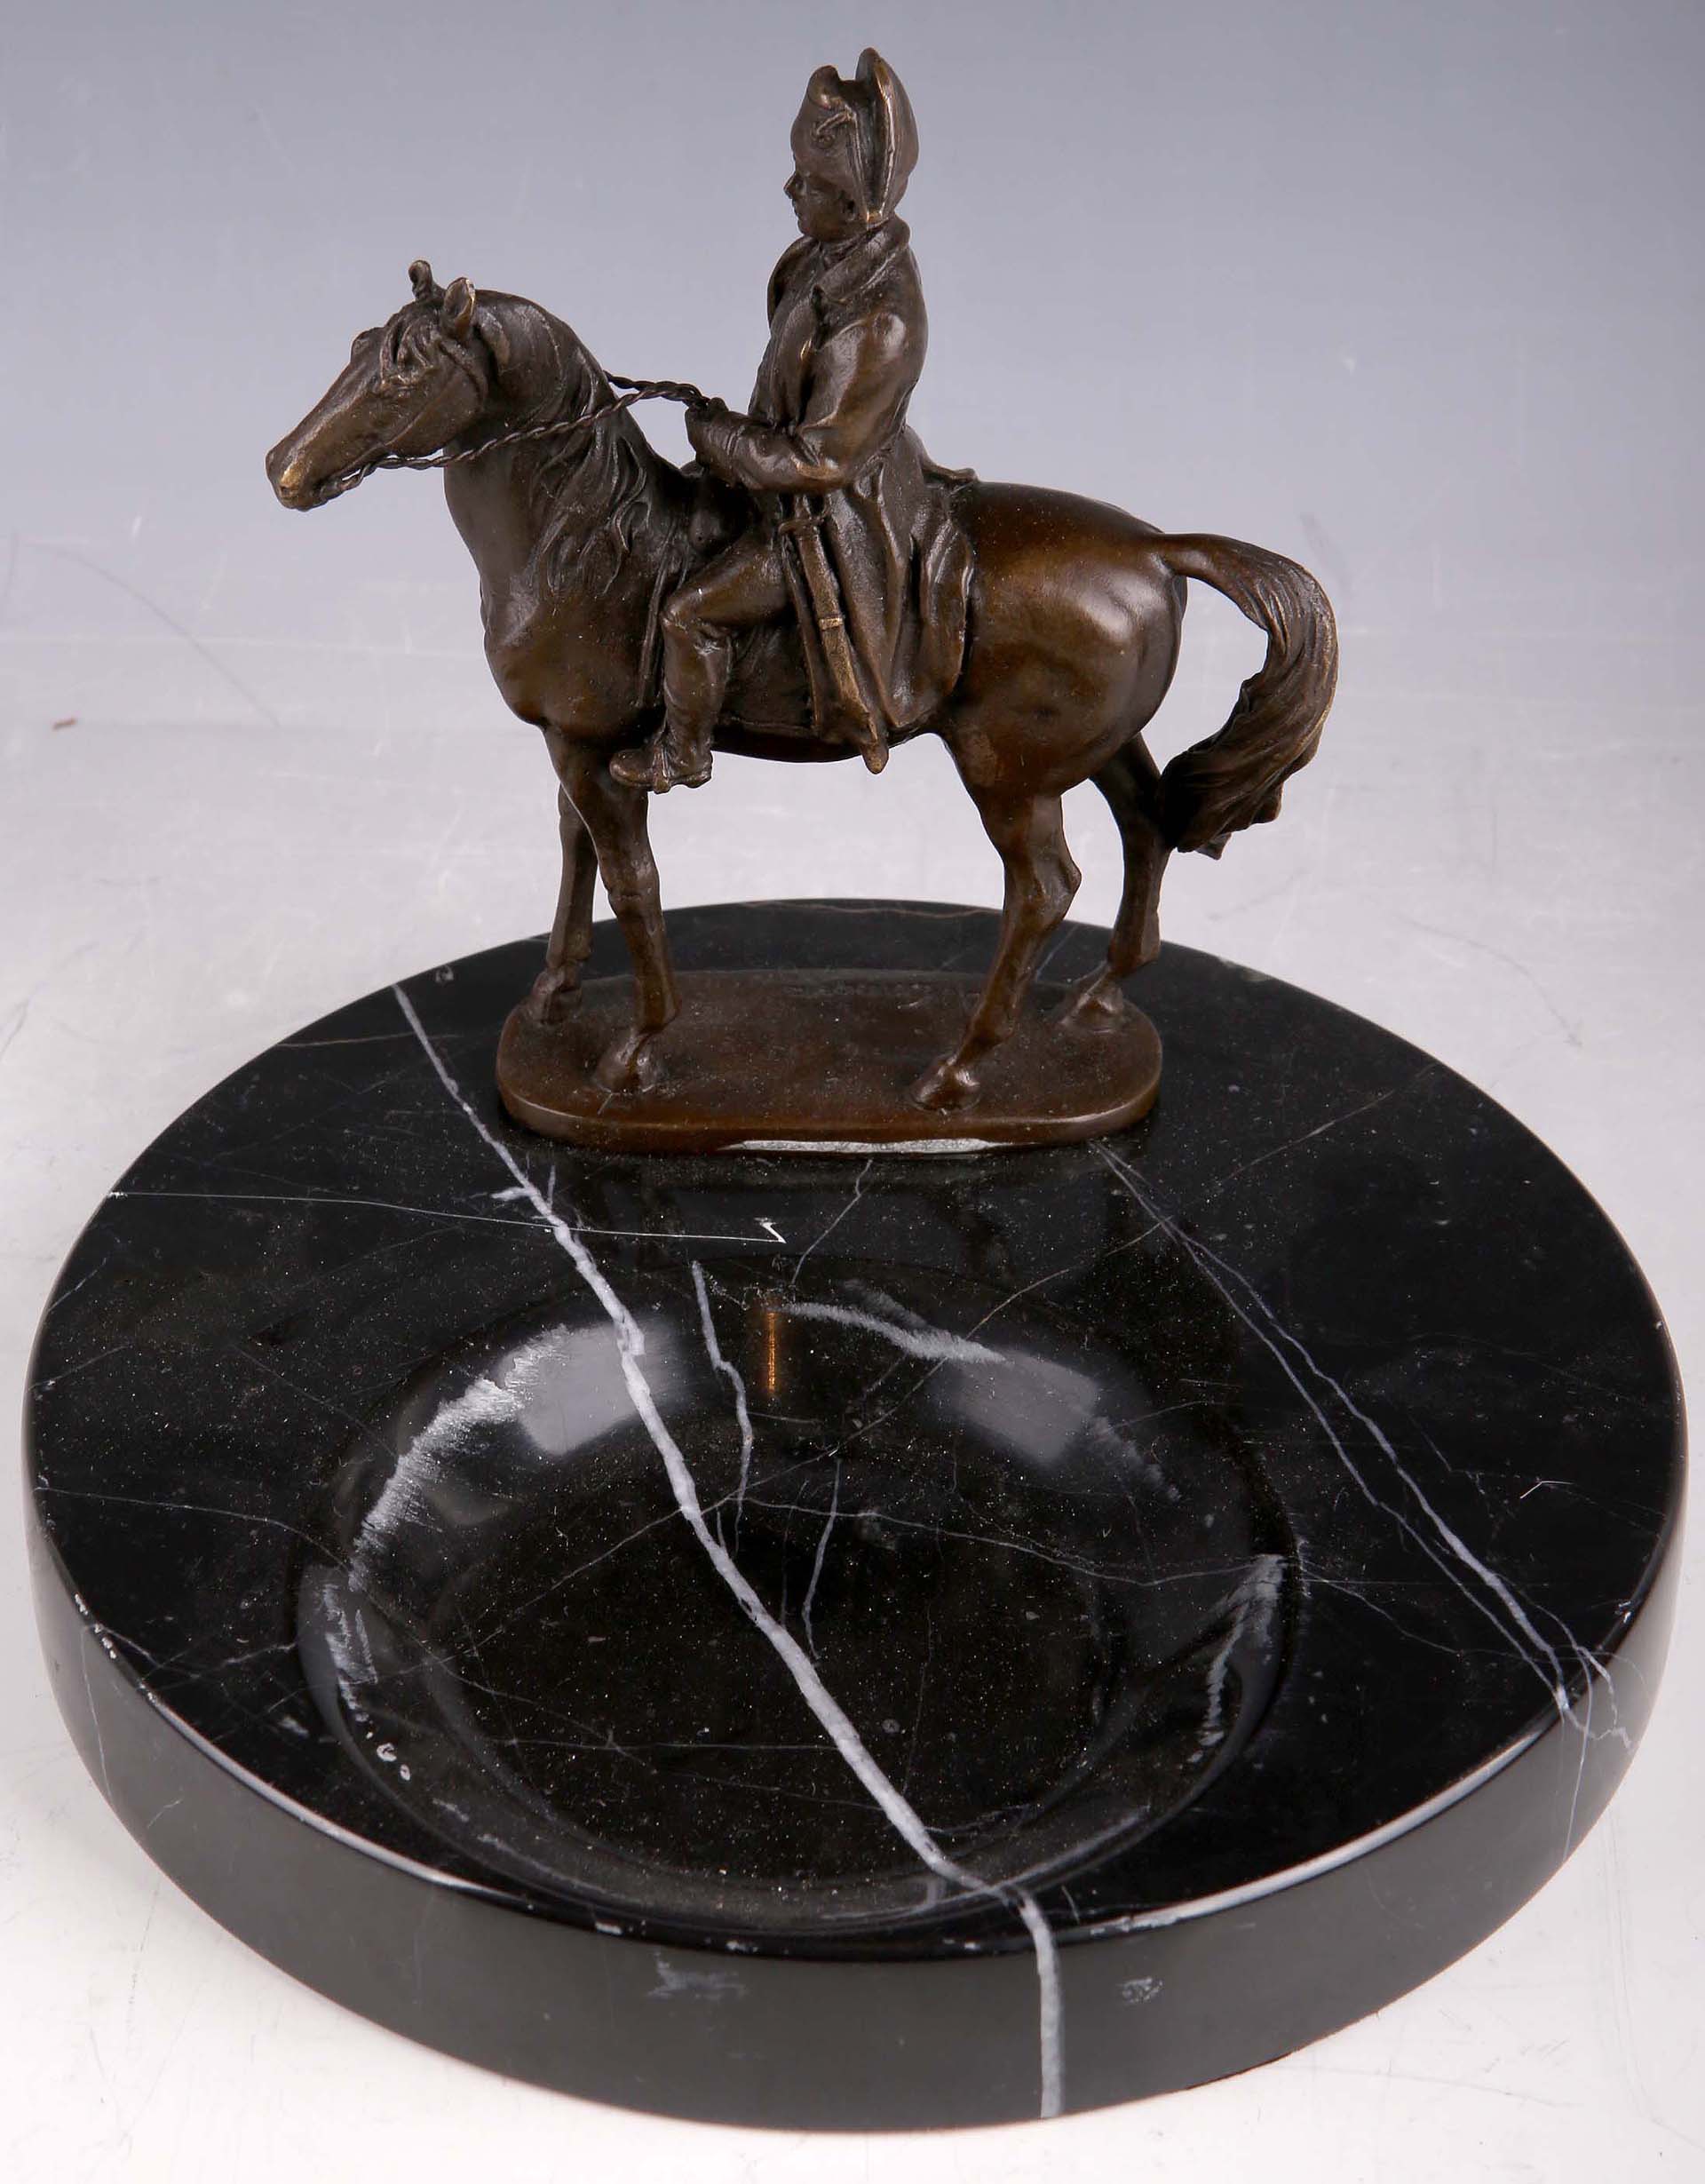 A black marble ashtray surmounted with a bronzed figure of Napoleon astride a horse.